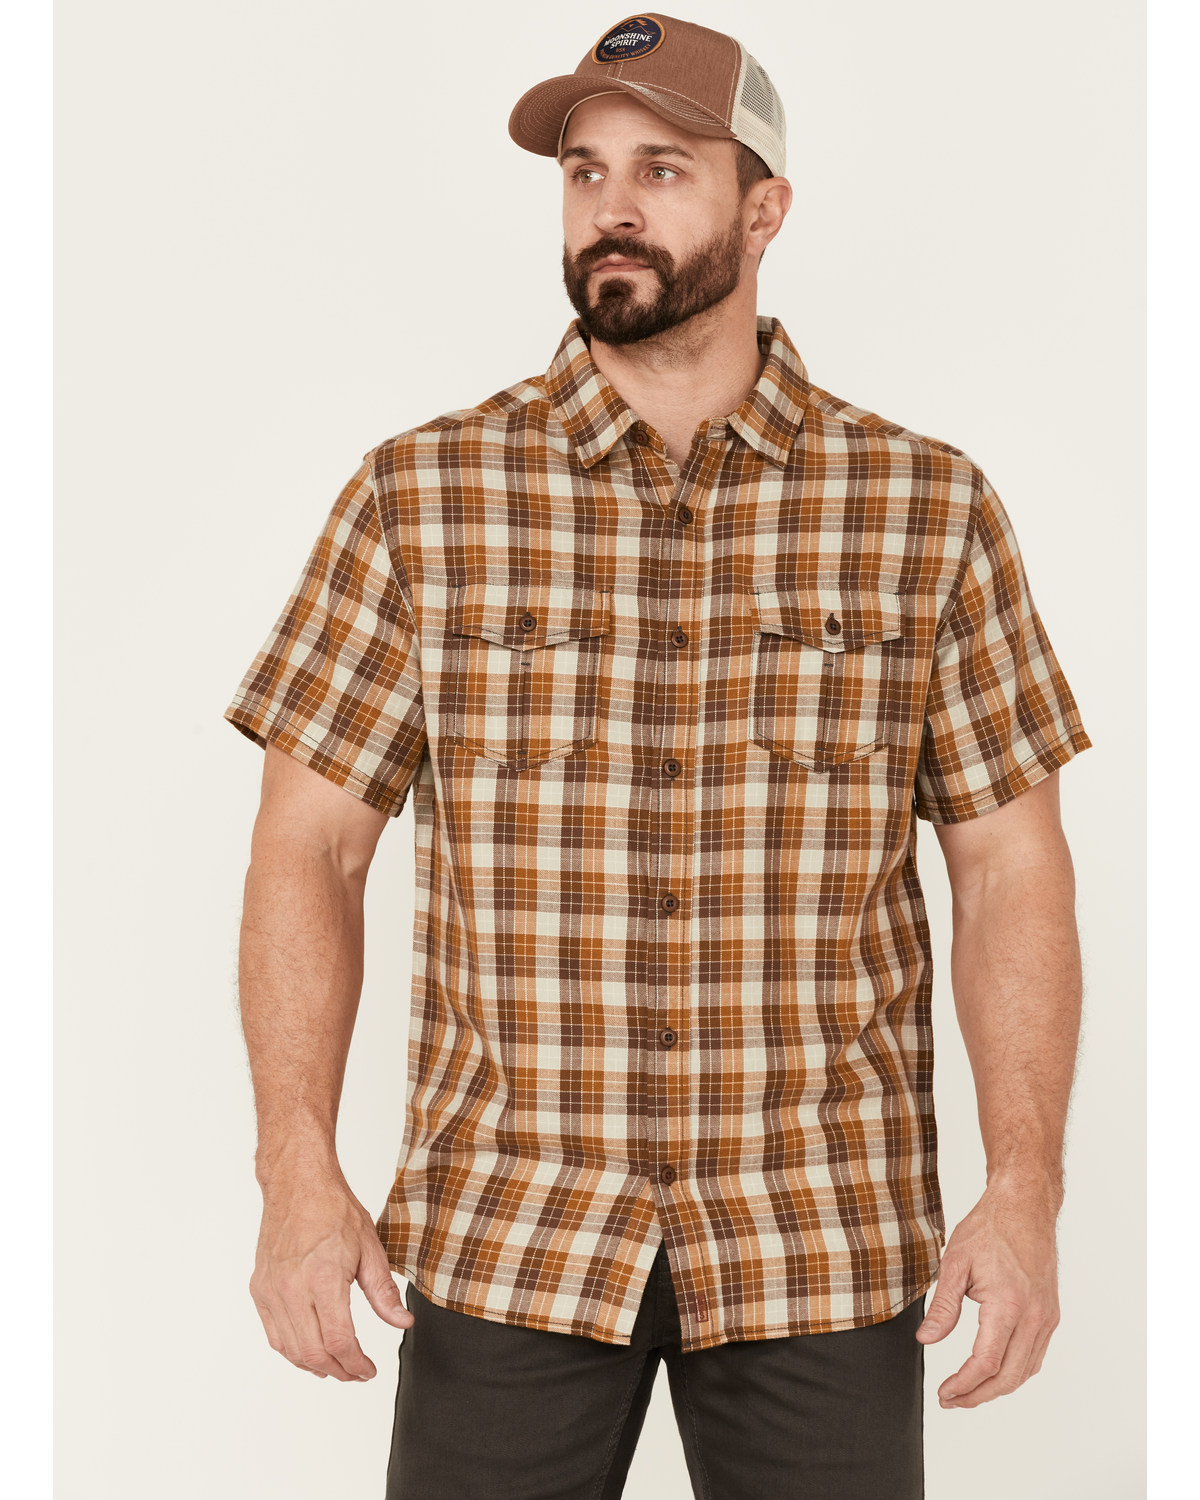 Brothers and Sons Men's Plaid Short Sleeve Button-Down Western Shirt